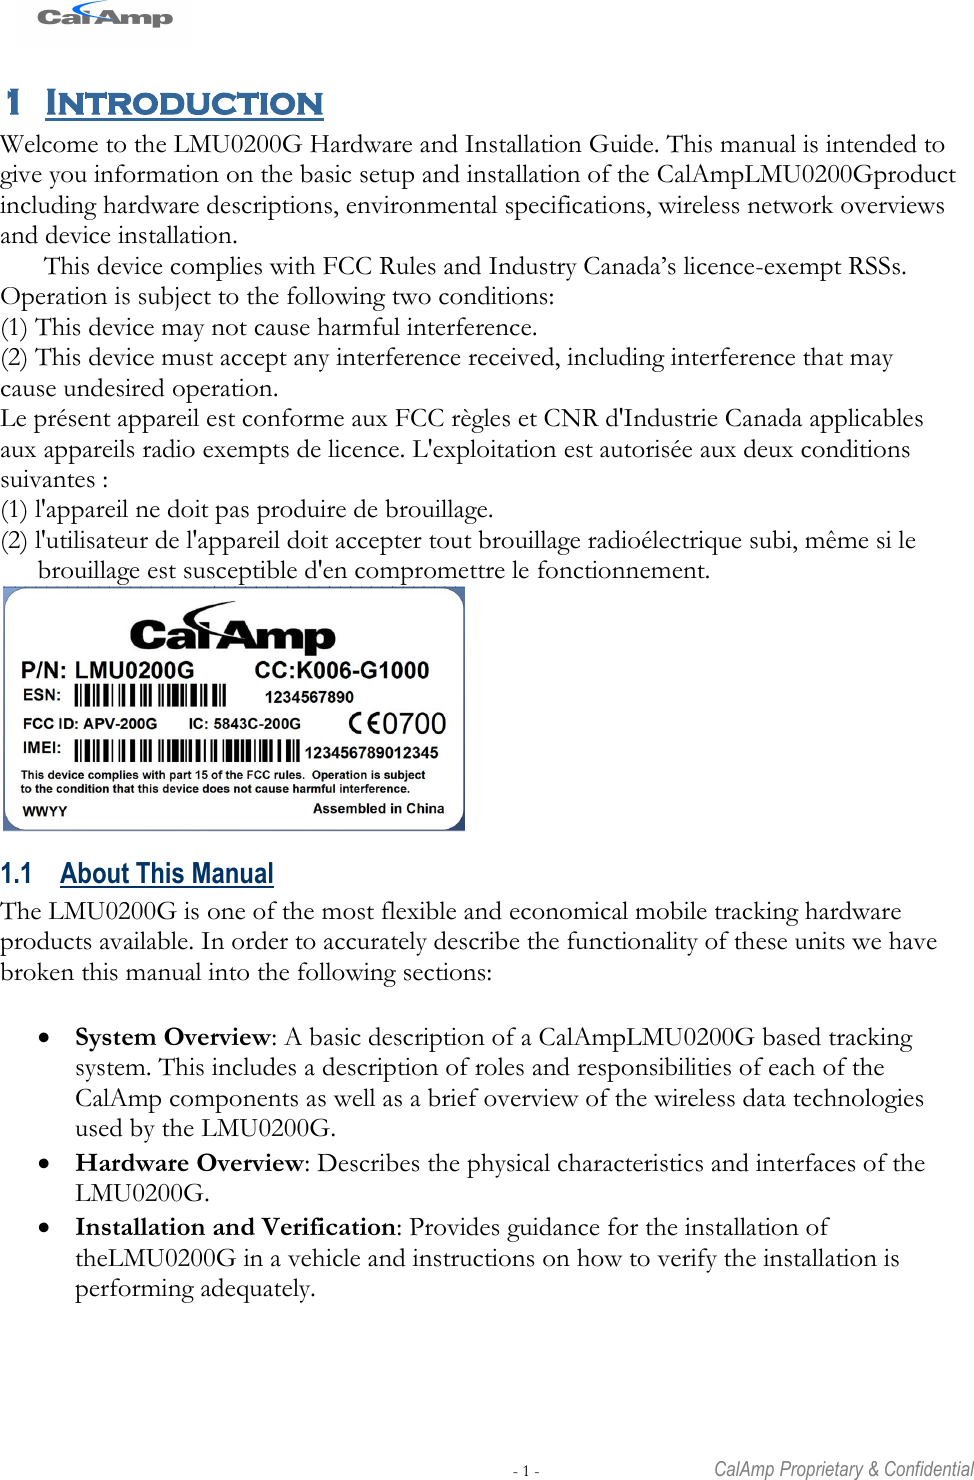   - 1 -  CalAmp Proprietary &amp; Confidential 1 Introduction Welcome to the LMU0200G Hardware and Installation Guide. This manual is intended to give you information on the basic setup and installation of the CalAmpLMU0200Gproduct including hardware descriptions, environmental specifications, wireless network overviews and device installation. This device complies with FCC Rules and Industry Canada‘s licence-exempt RSSs. Operation is subject to the following two conditions: (1) This device may not cause harmful interference. (2) This device must accept any interference received, including interference that may cause undesired operation. Le présent appareil est conforme aux FCC règles et CNR d&apos;Industrie Canada applicables aux appareils radio exempts de licence. L&apos;exploitation est autorisée aux deux conditions suivantes : (1) l&apos;appareil ne doit pas produire de brouillage. (2) l&apos;utilisateur de l&apos;appareil doit accepter tout brouillage radioélectrique subi, même si le brouillage est susceptible d&apos;en compromettre le fonctionnement.  1.1 About This Manual The LMU0200G is one of the most flexible and economical mobile tracking hardware products available. In order to accurately describe the functionality of these units we have broken this manual into the following sections:   System Overview: A basic description of a CalAmpLMU0200G based tracking system. This includes a description of roles and responsibilities of each of the CalAmp components as well as a brief overview of the wireless data technologies used by the LMU0200G.  Hardware Overview: Describes the physical characteristics and interfaces of the LMU0200G.  Installation and Verification: Provides guidance for the installation of theLMU0200G in a vehicle and instructions on how to verify the installation is performing adequately. 